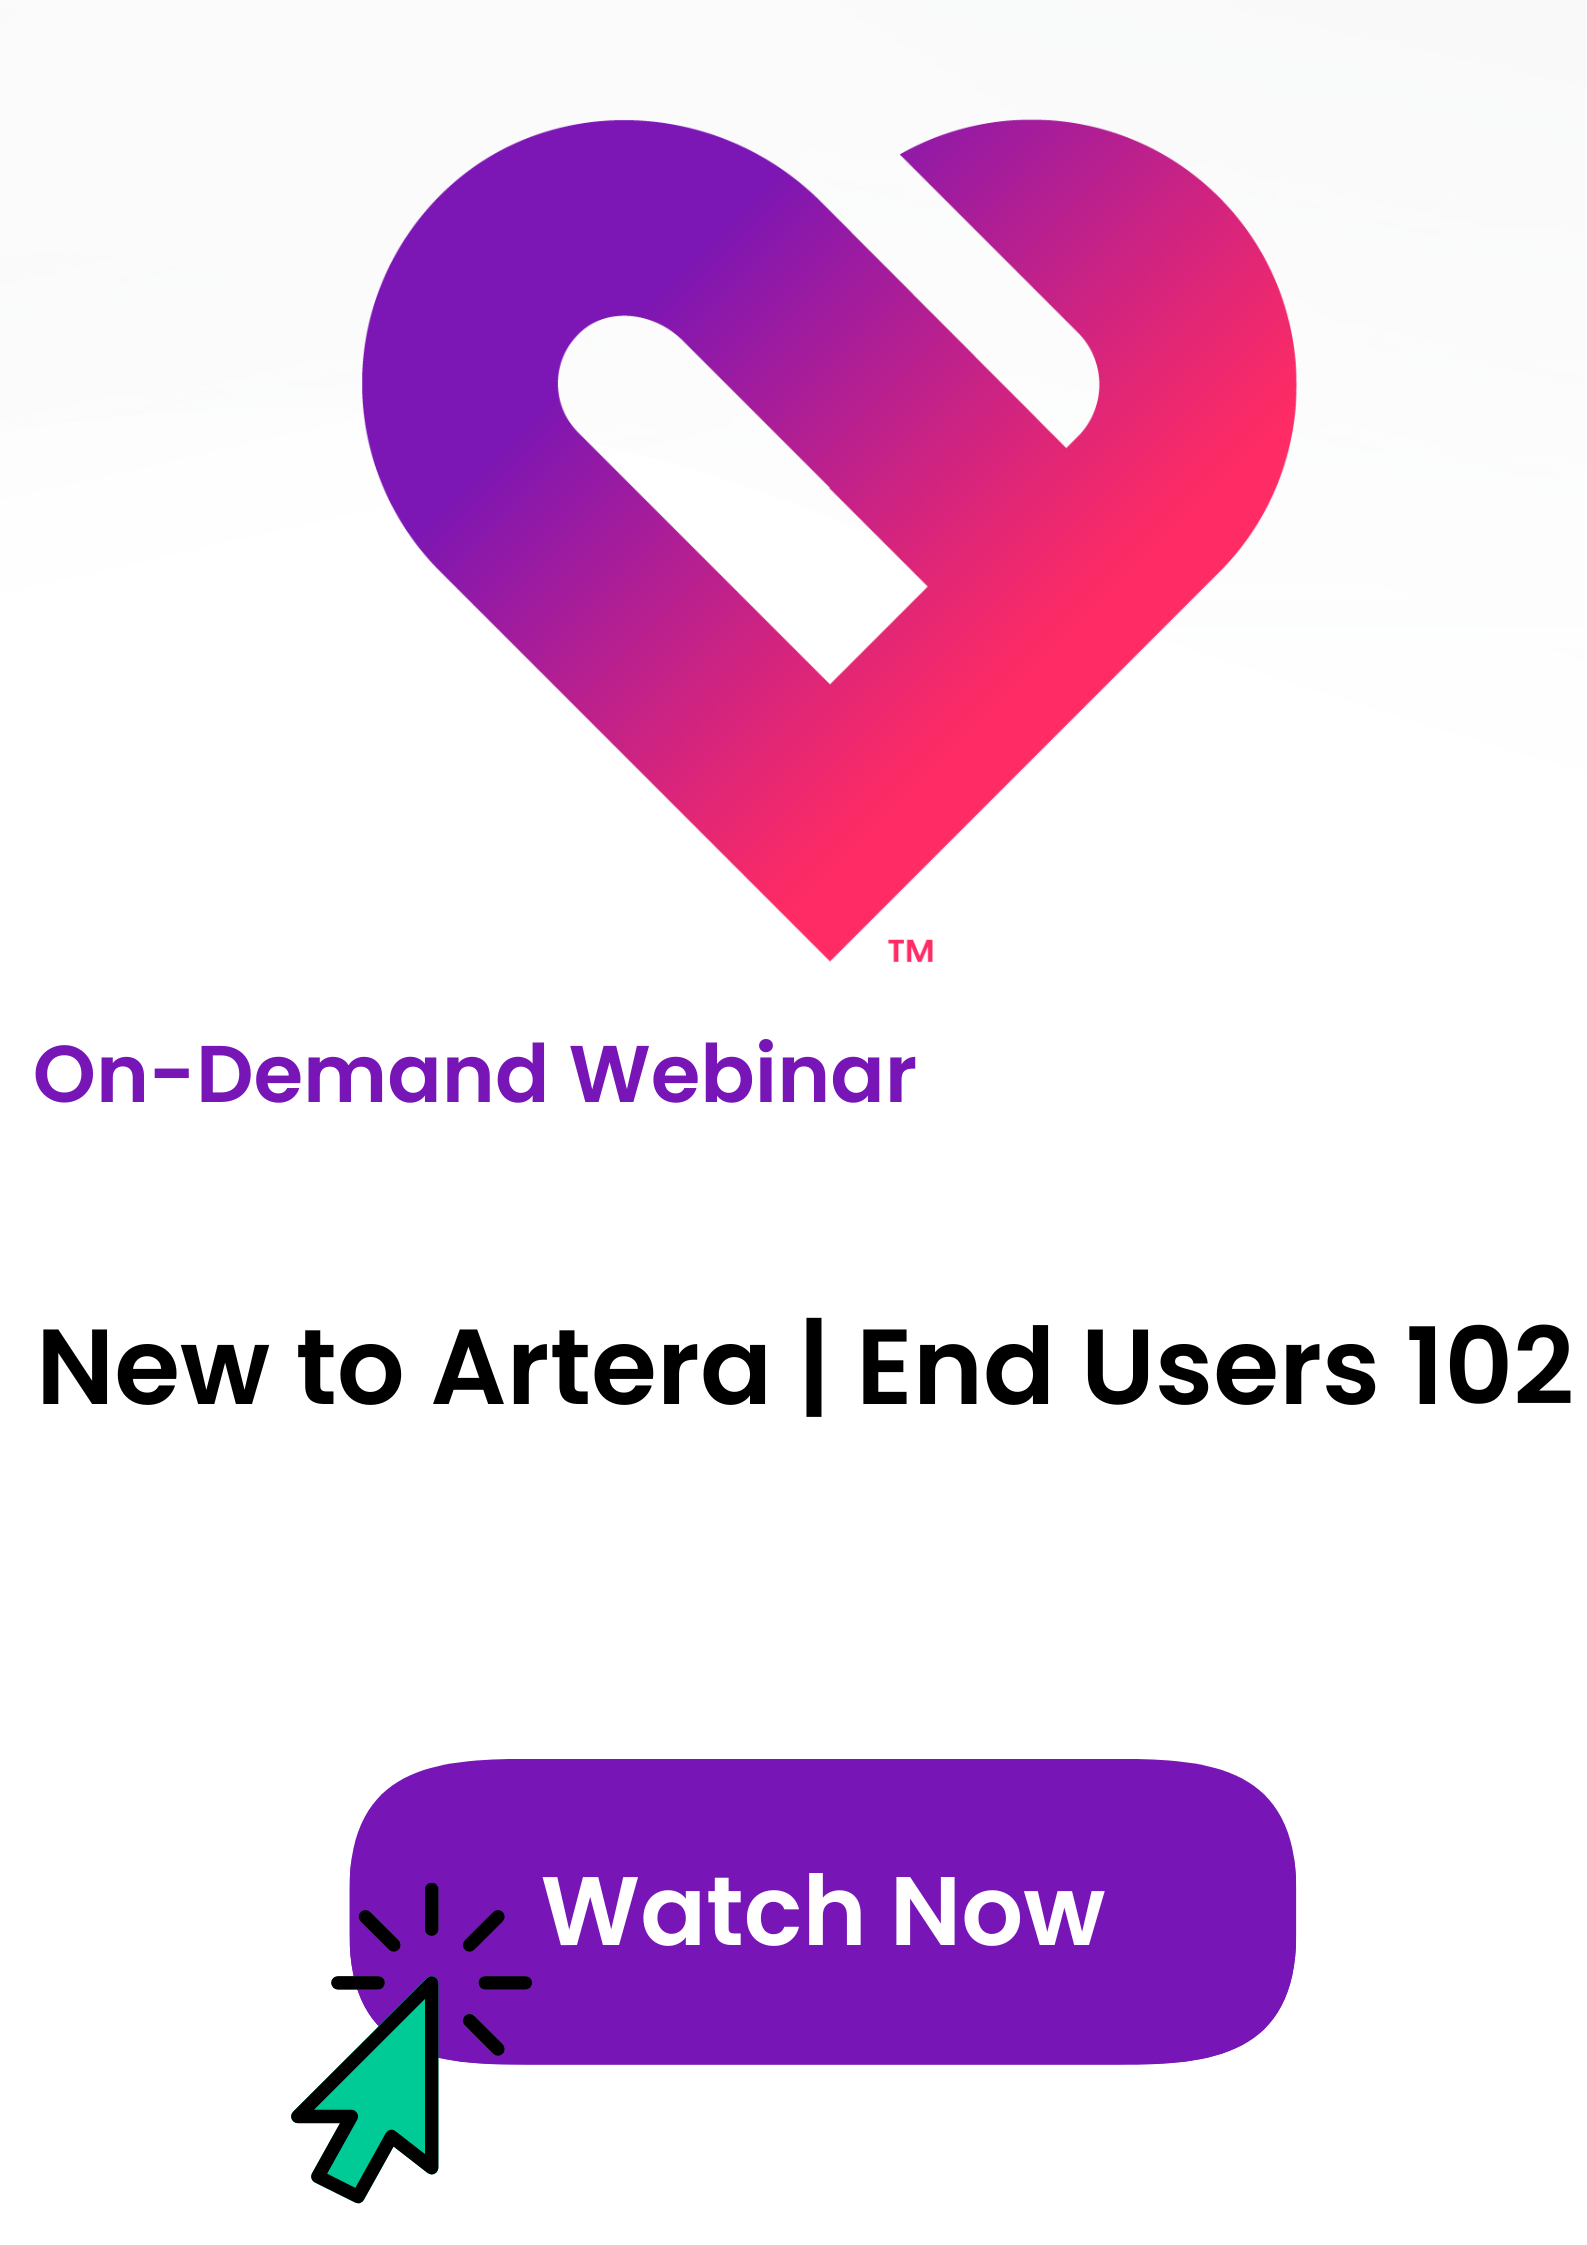 On-demand webinar tile for New to Artera End Users, click to watch now